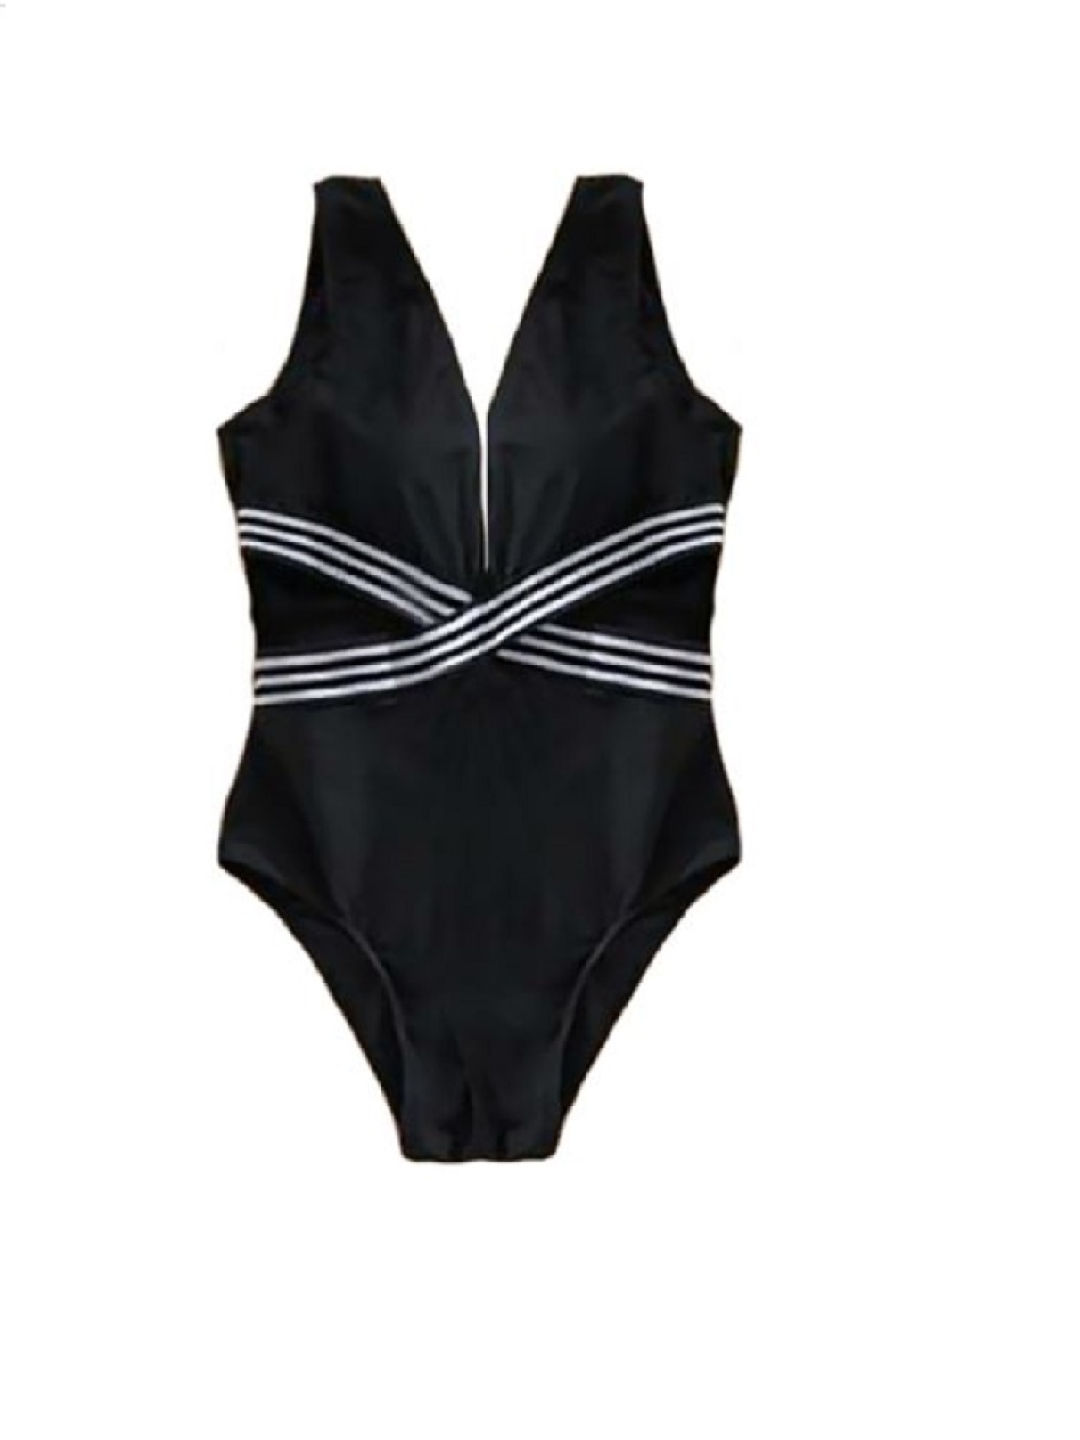 Beauty in Black Swimsuit for Young Girls – MommyHugs